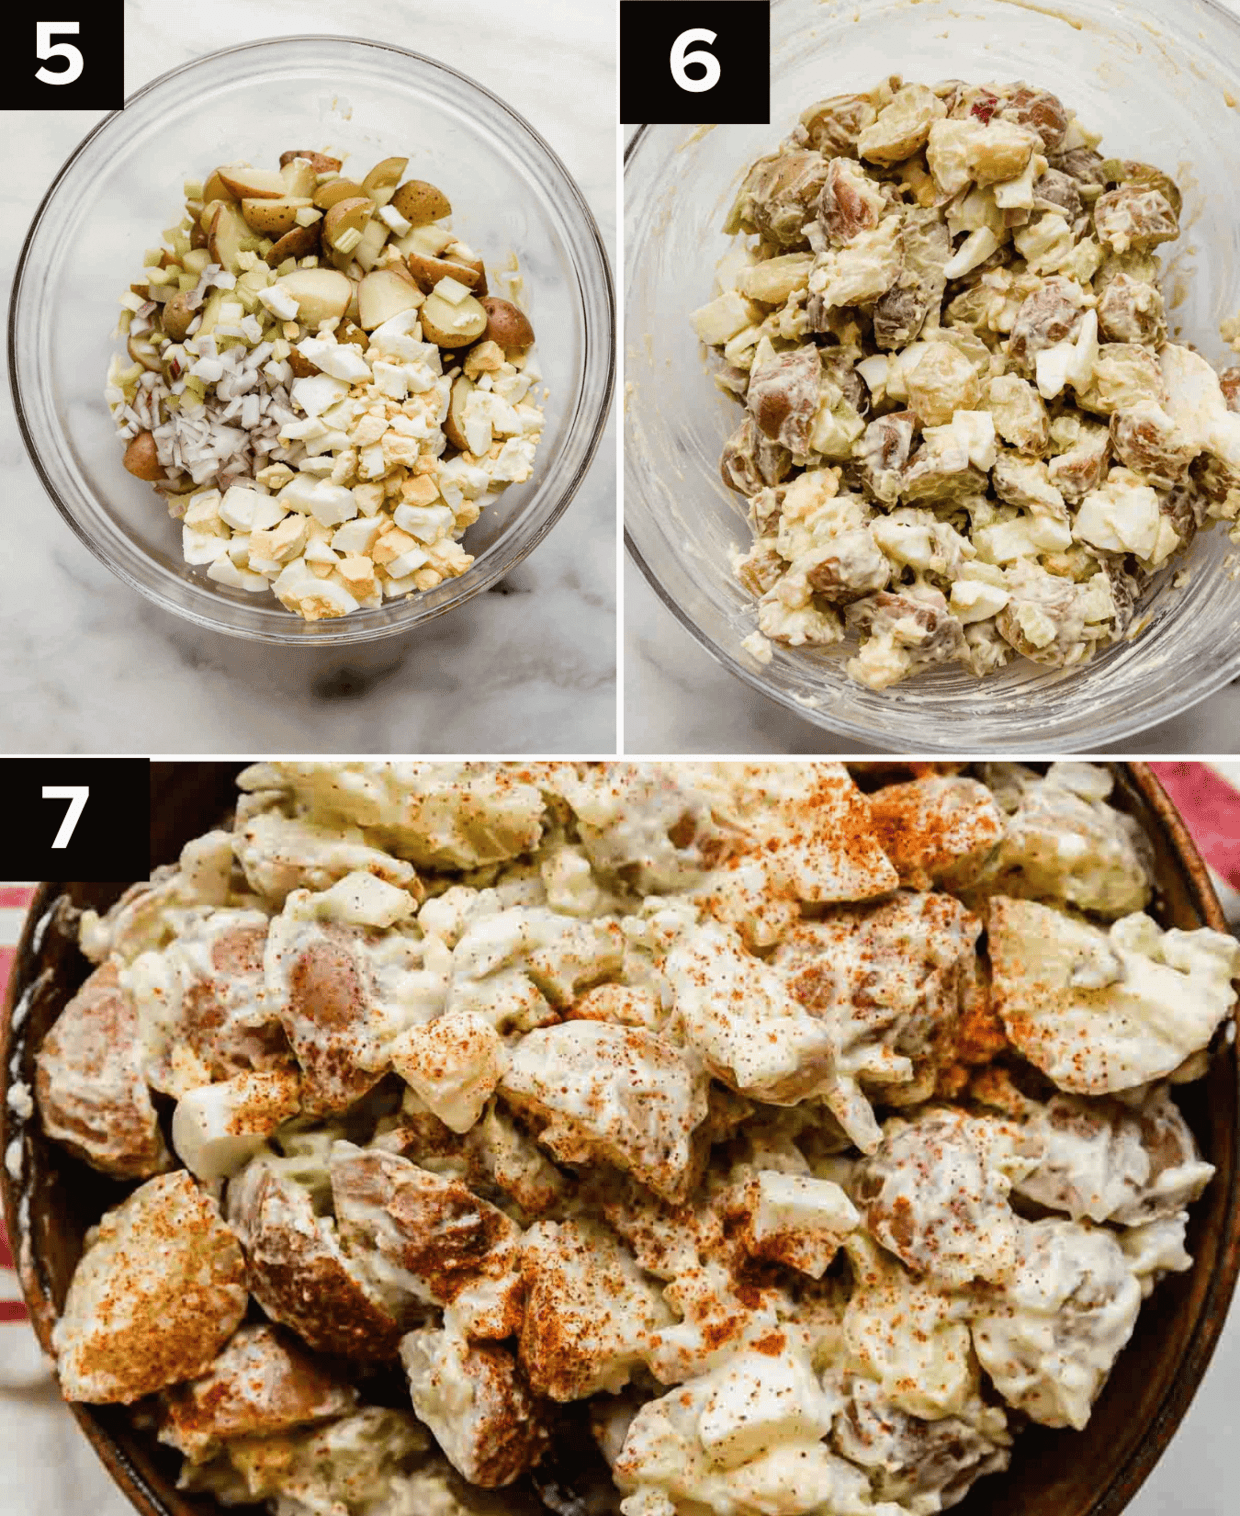 Top left is glass bowls with baby potato salad without being mixed into the mayo dressing, top right is baby potato salad in glass bowl, bottom photo is paprika topped potato salad.